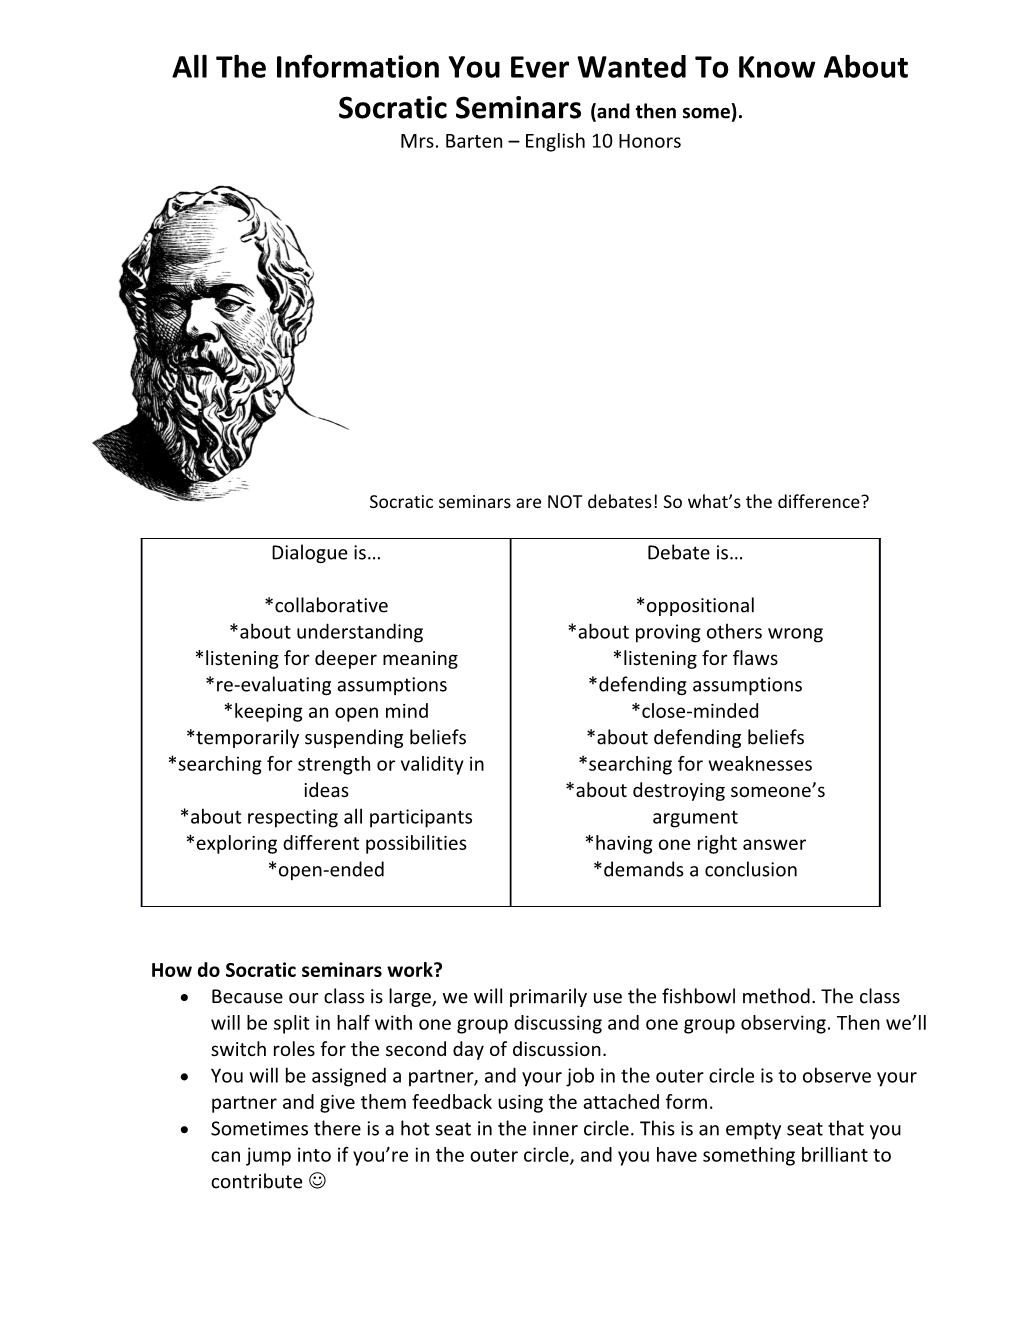 All the Information You Ever Wanted to Know About Socratic Seminars (And Then Some)